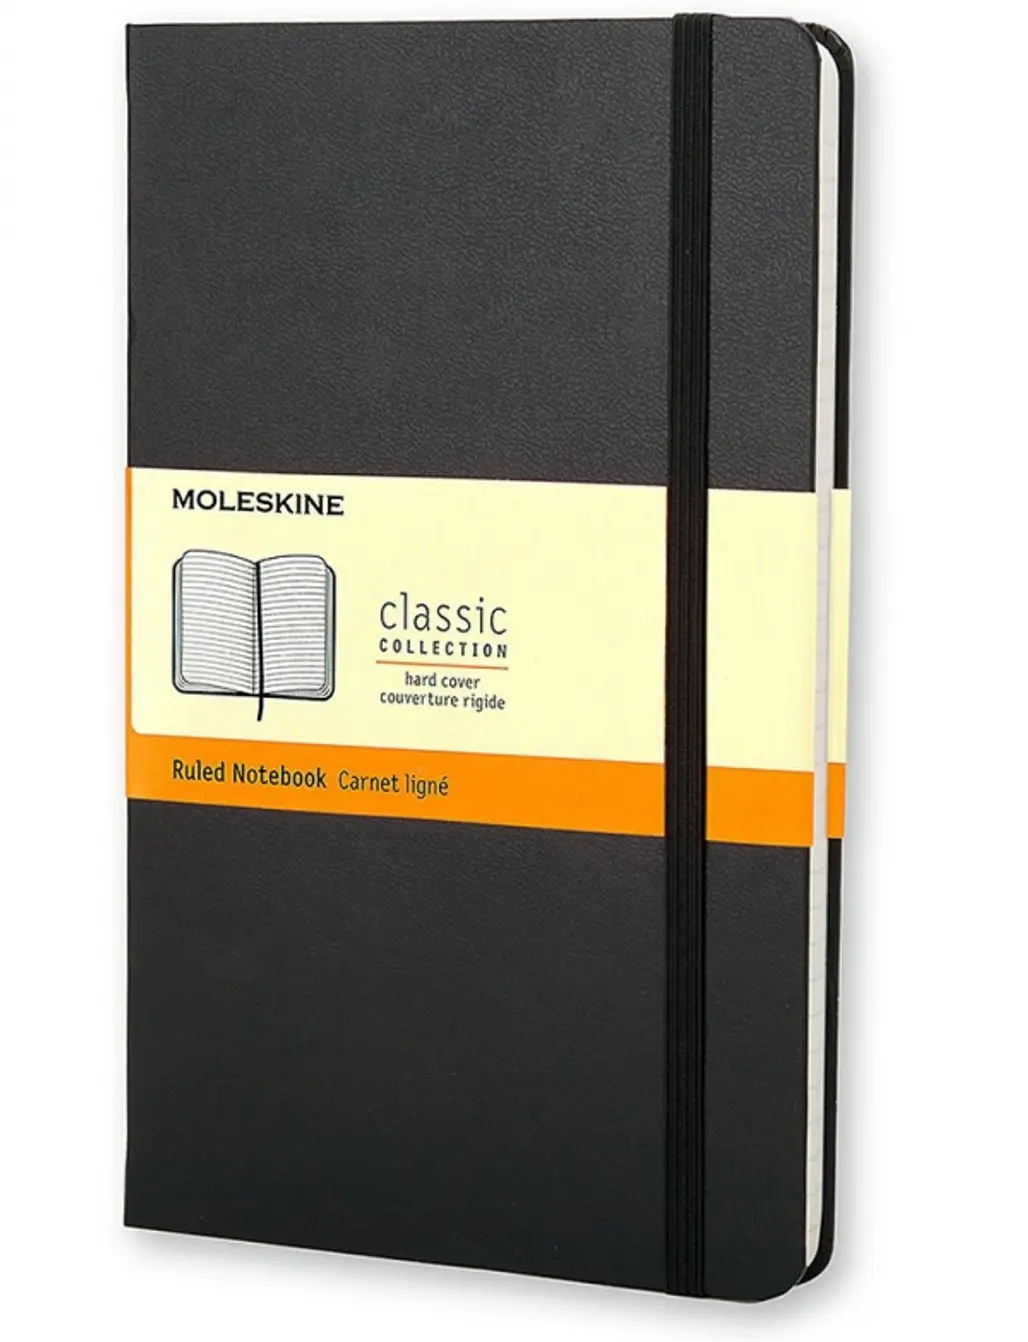 product,brand,document,MOLESKINE,COLLECTION,